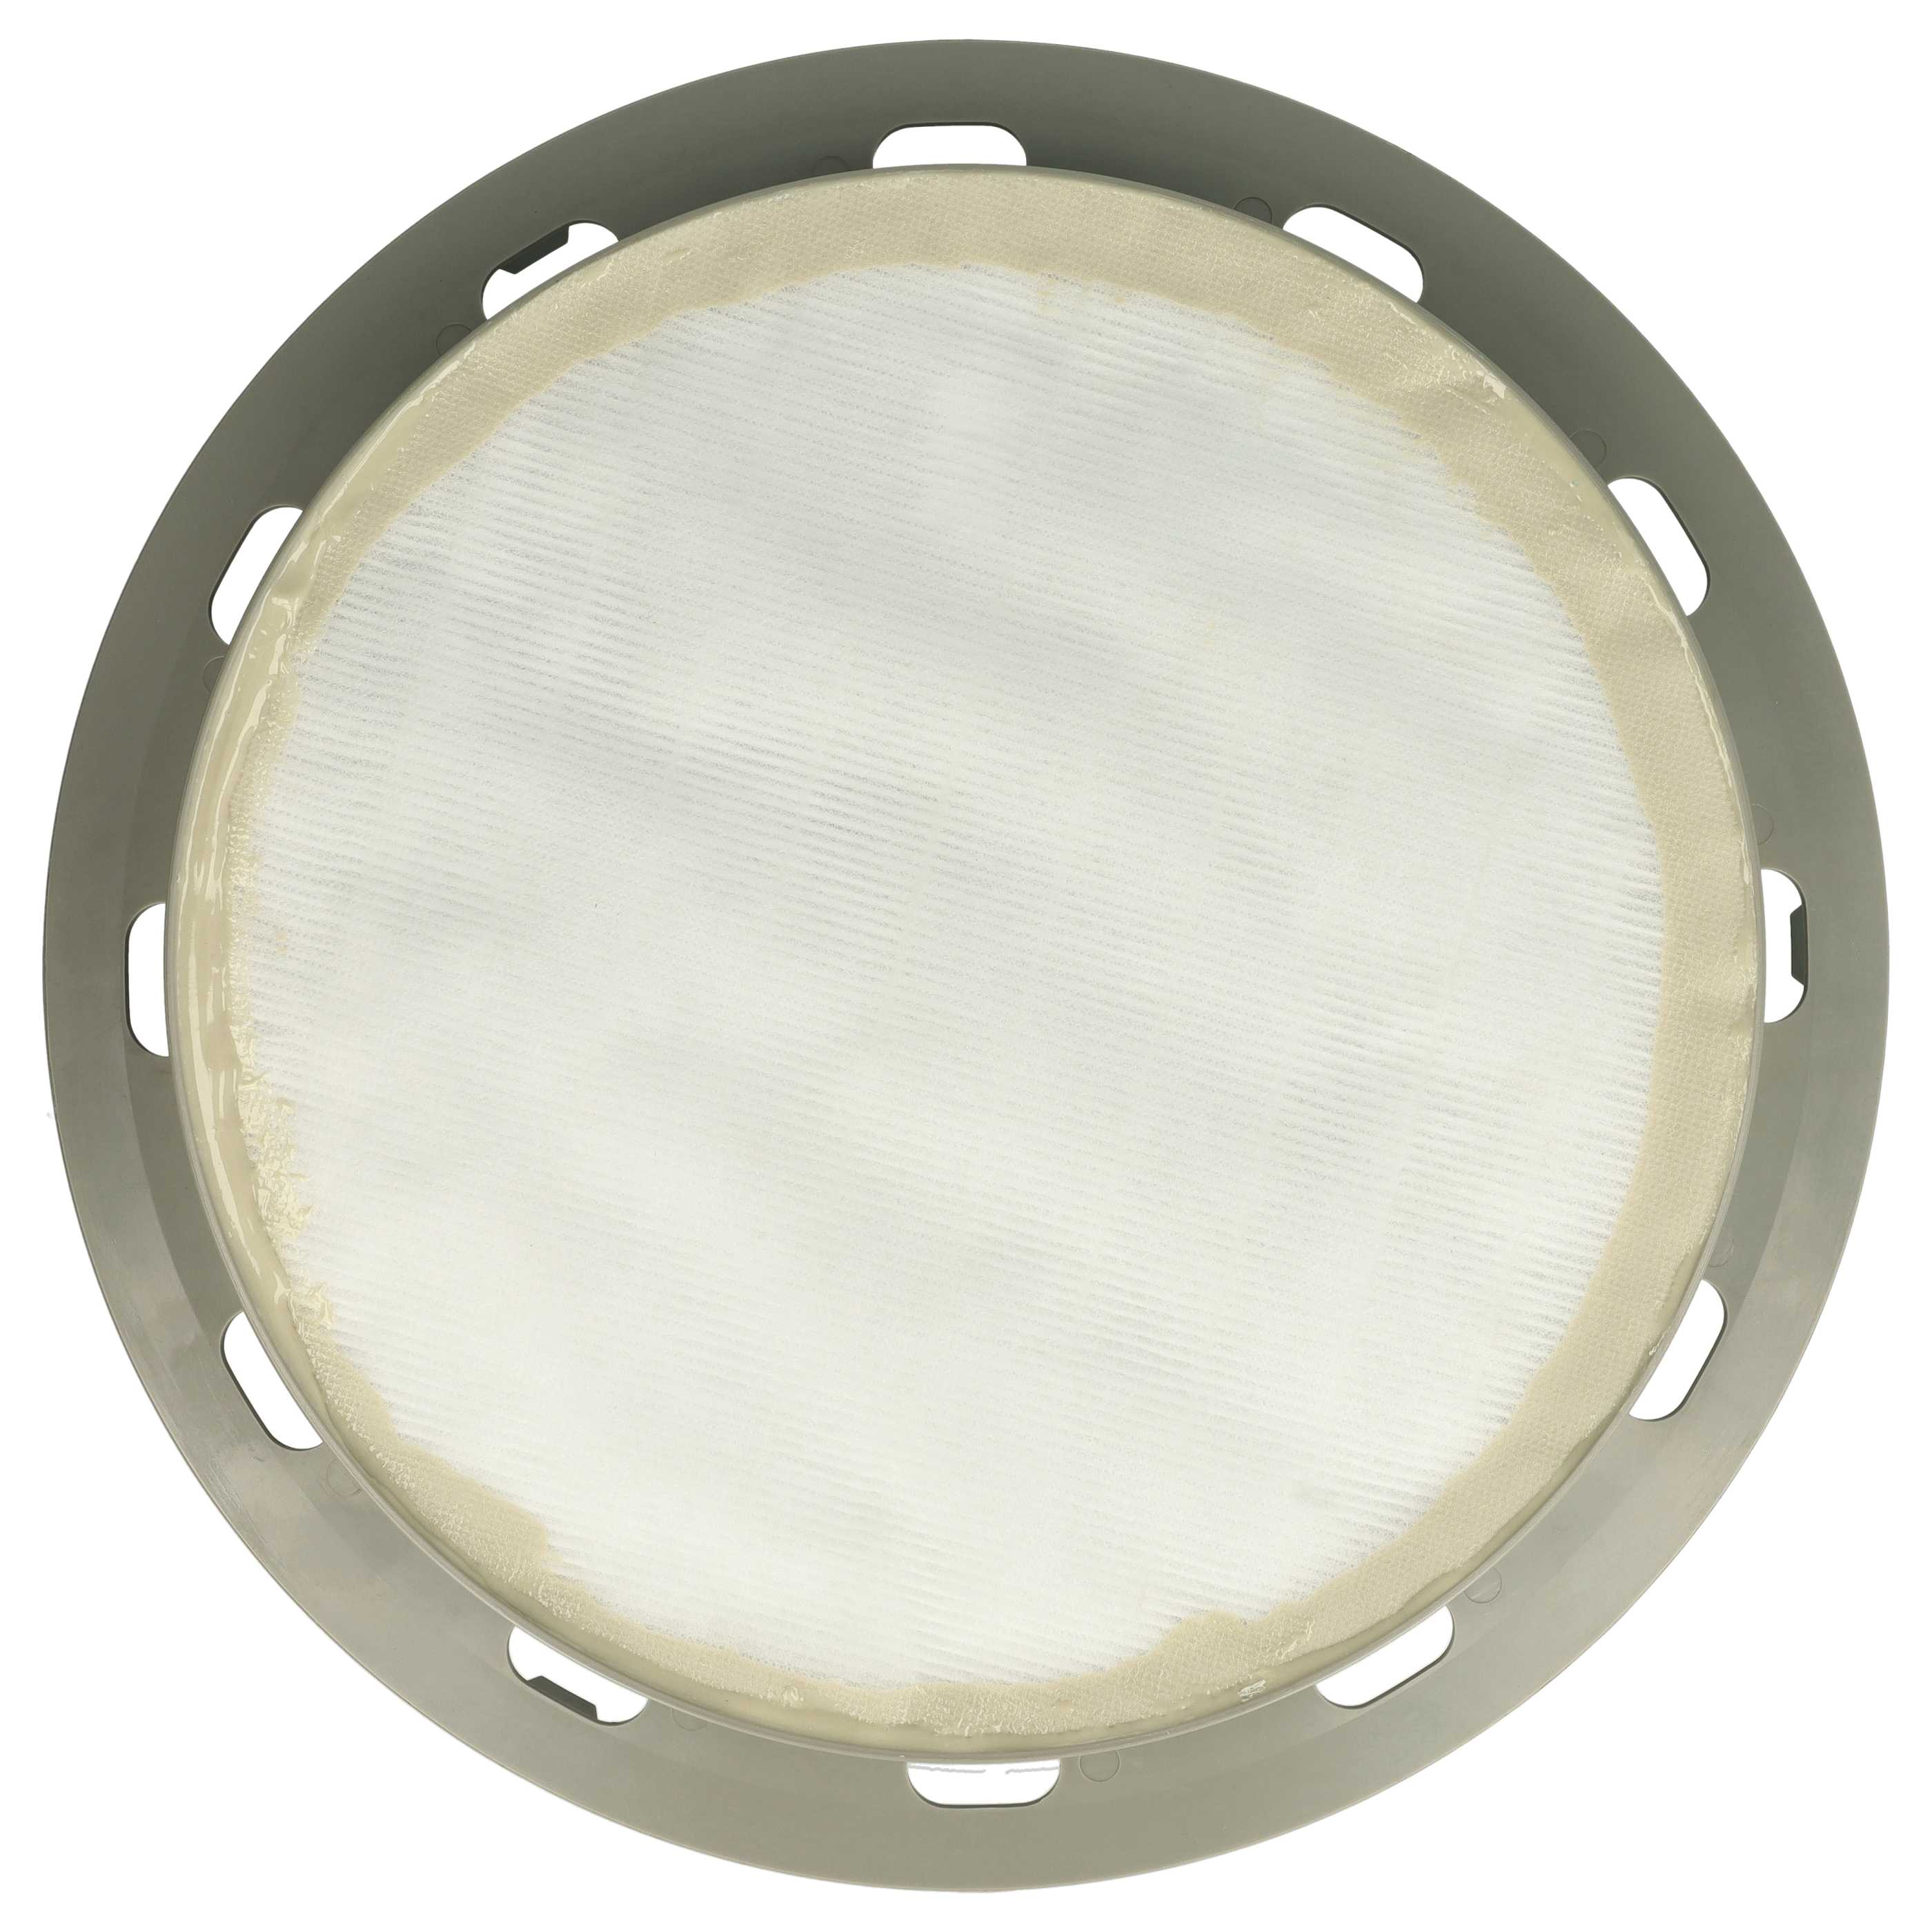 1x HEPA filter replaces Nilfisk Alto 1402666010, 140 2666 010 for Nilfisk Alto Vacuum Cleaner